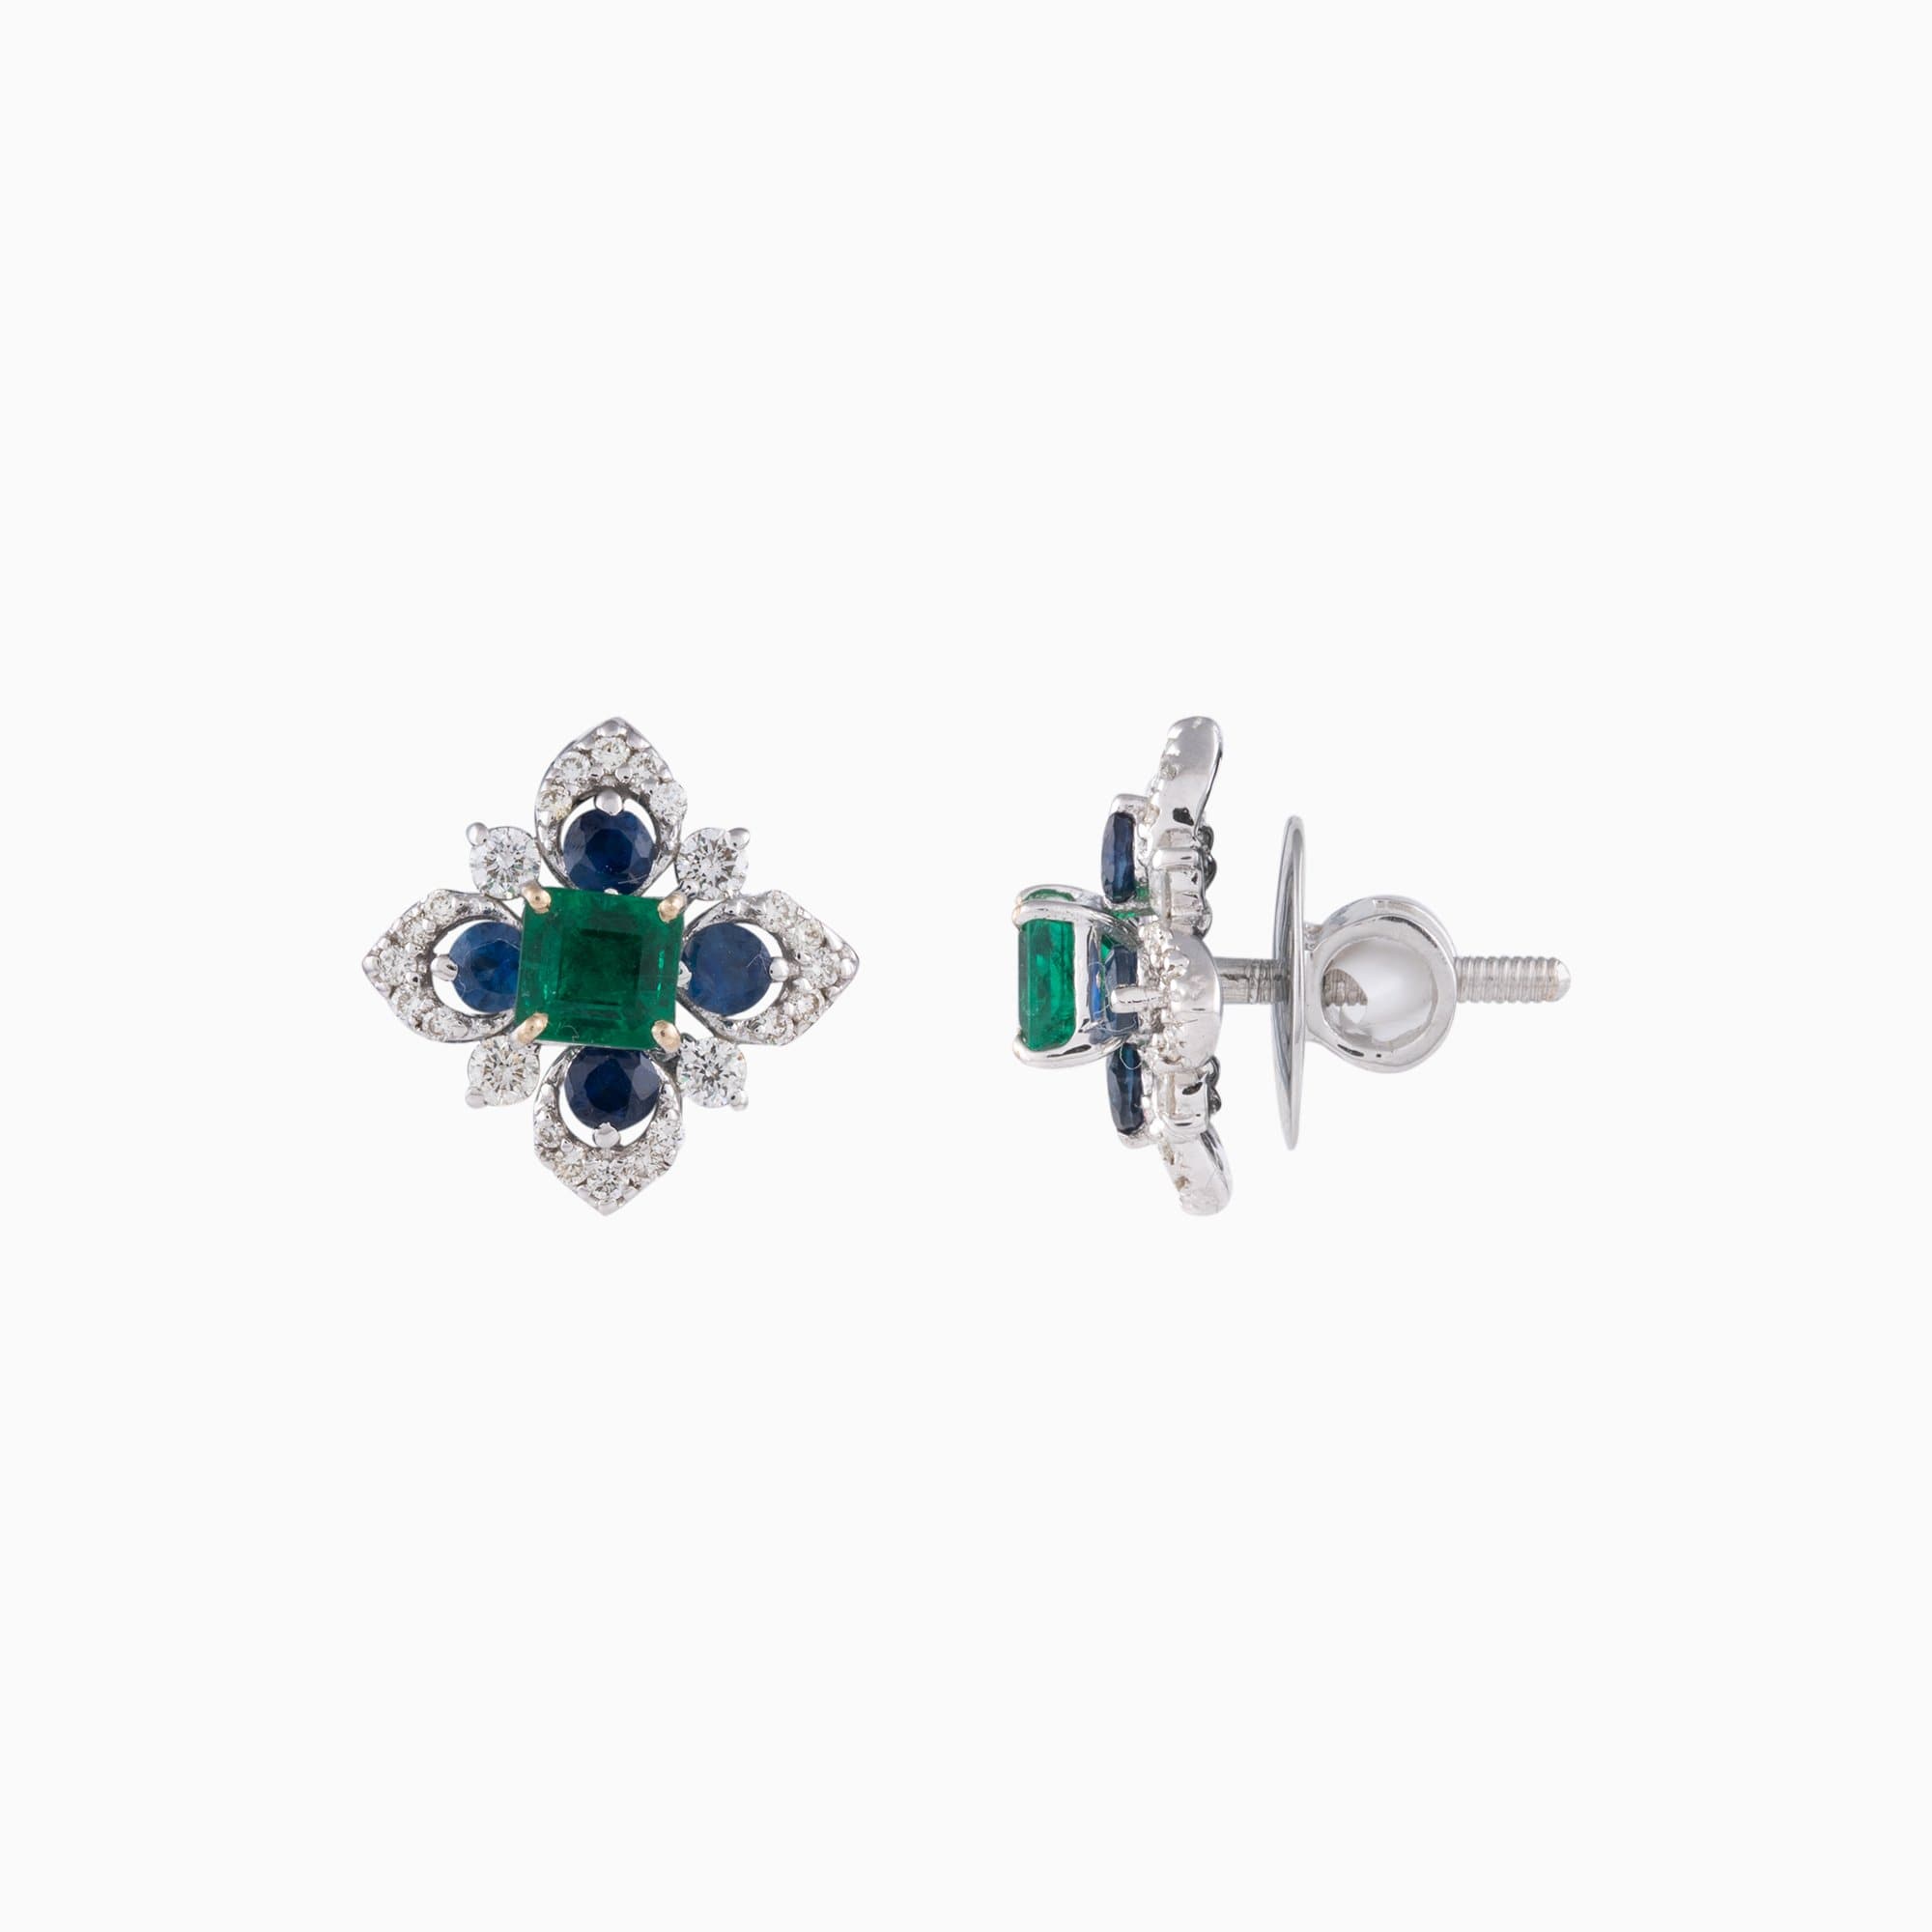 Earring Pair with Octagon Cut Emerald, Blue Sapphire and Round Cut Diamond - PGDE0245